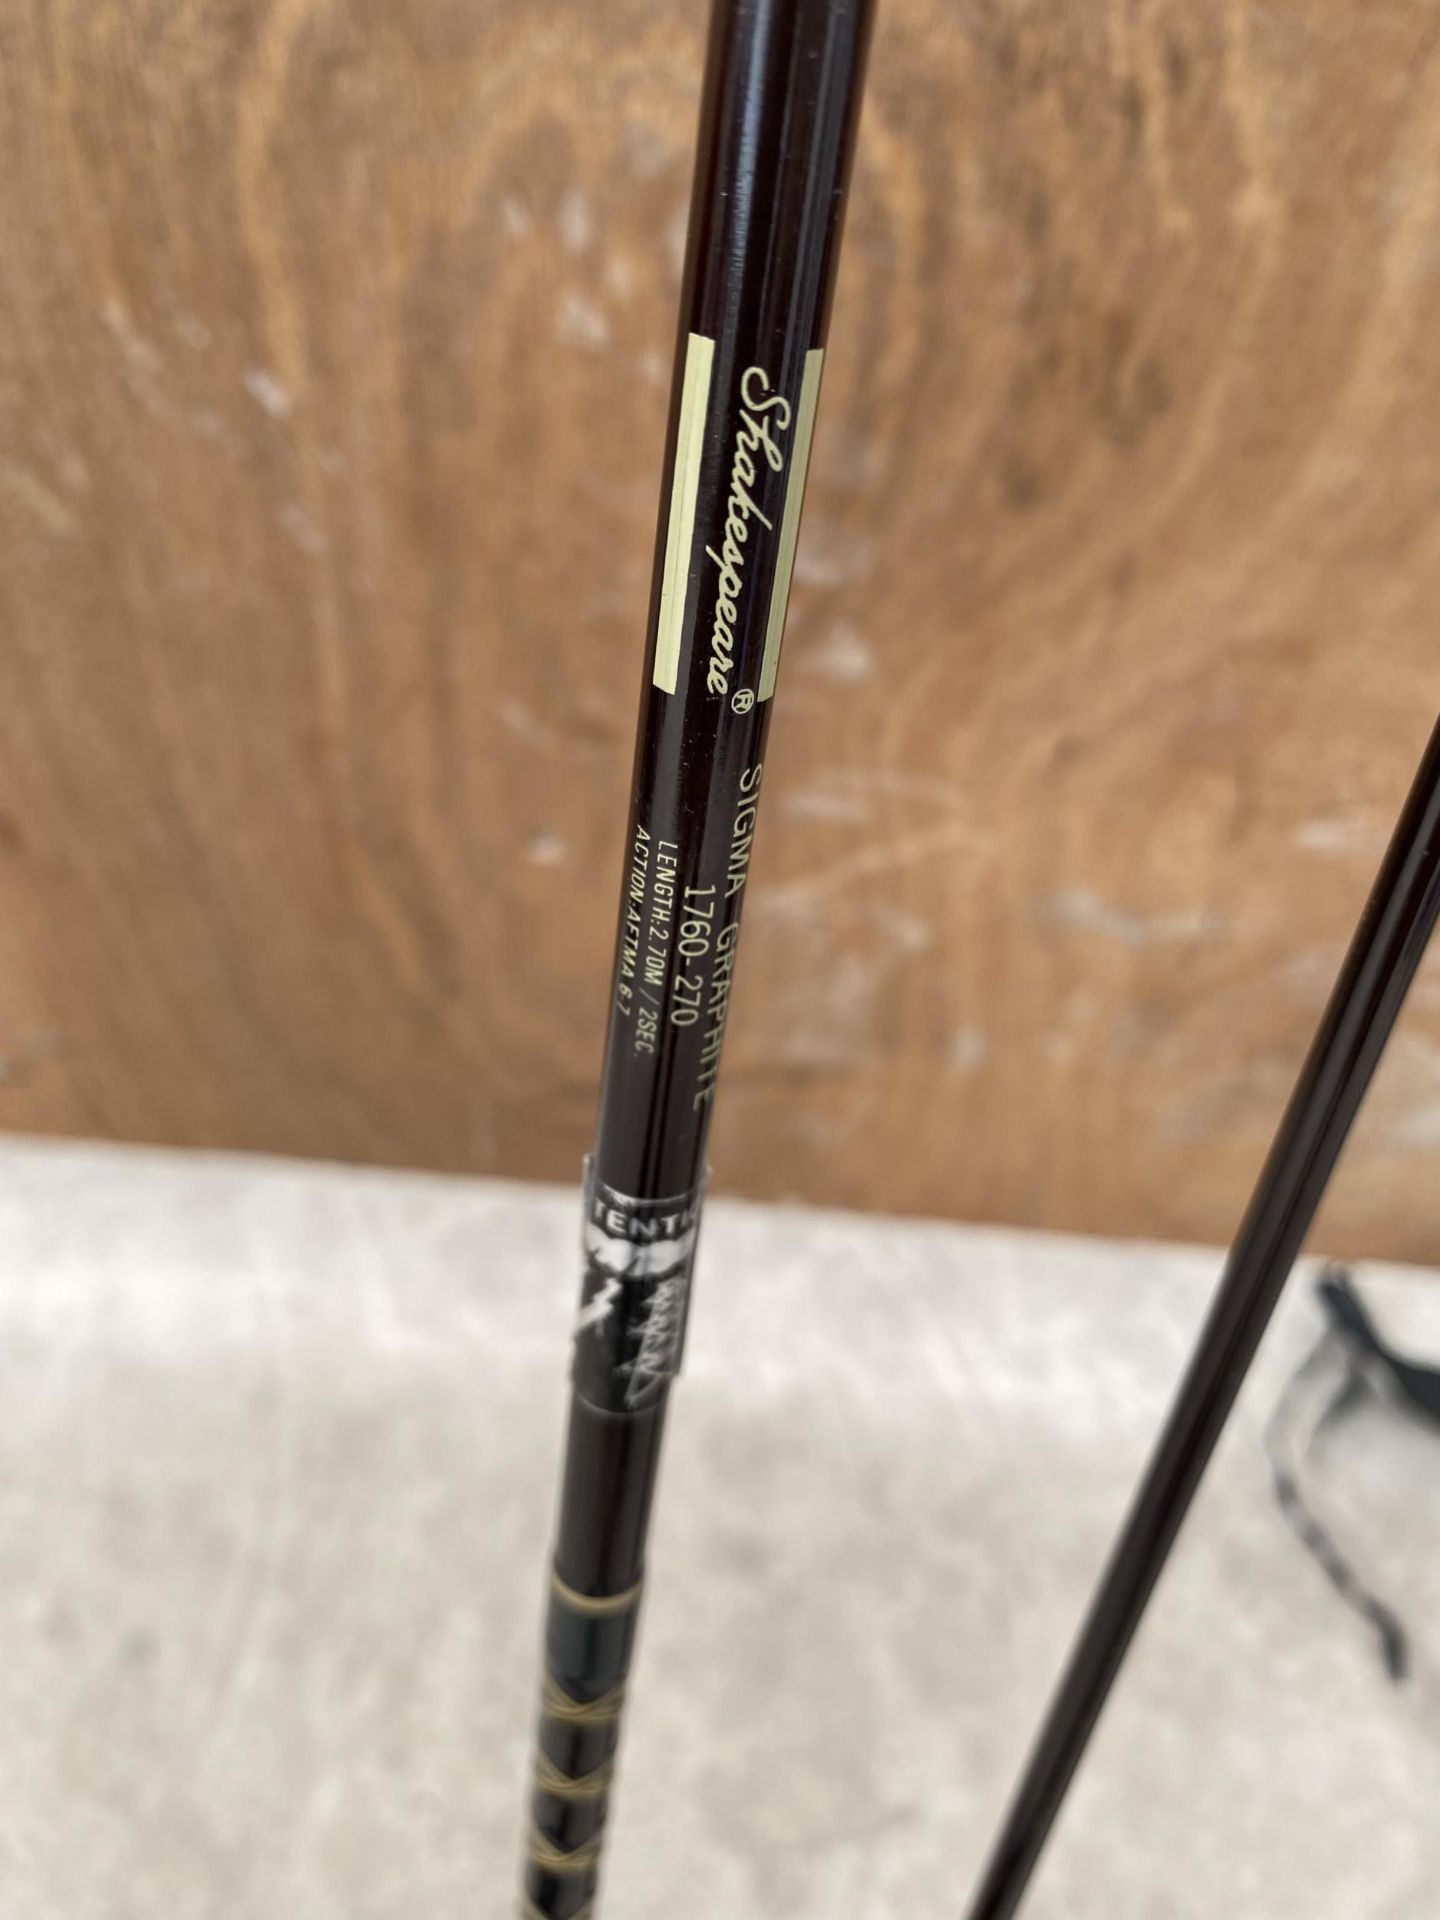 TWO FLY FISHING RODS CONSISTING OF AN ASTROBLACK 9'6" 8-9# AND A SHAKESPERE SIGMA GRAPHITE 8'10" 6- - Image 8 of 9